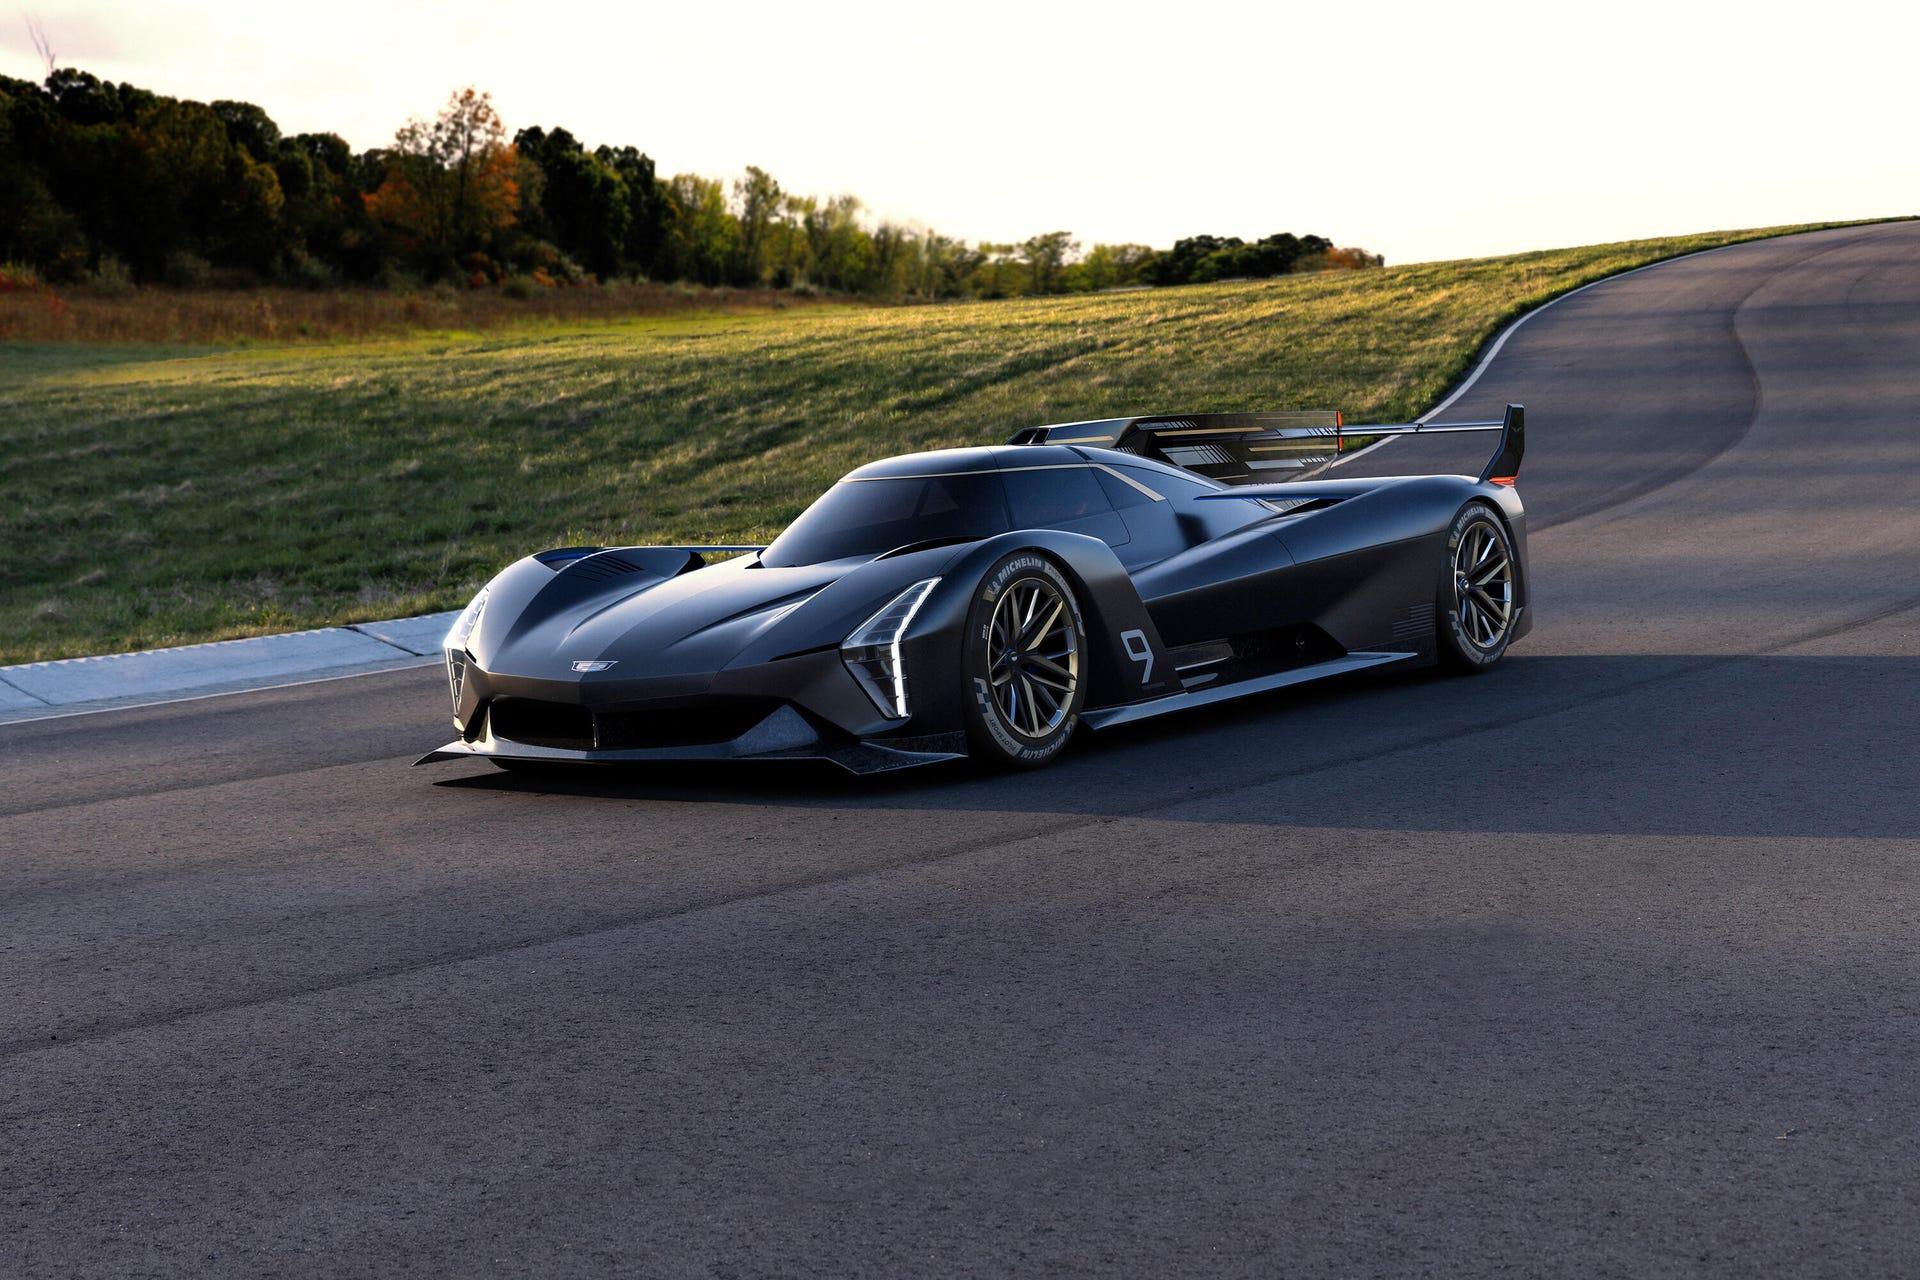 Cadillac Project Gtp Hypercar Is Headed To Daytona In C